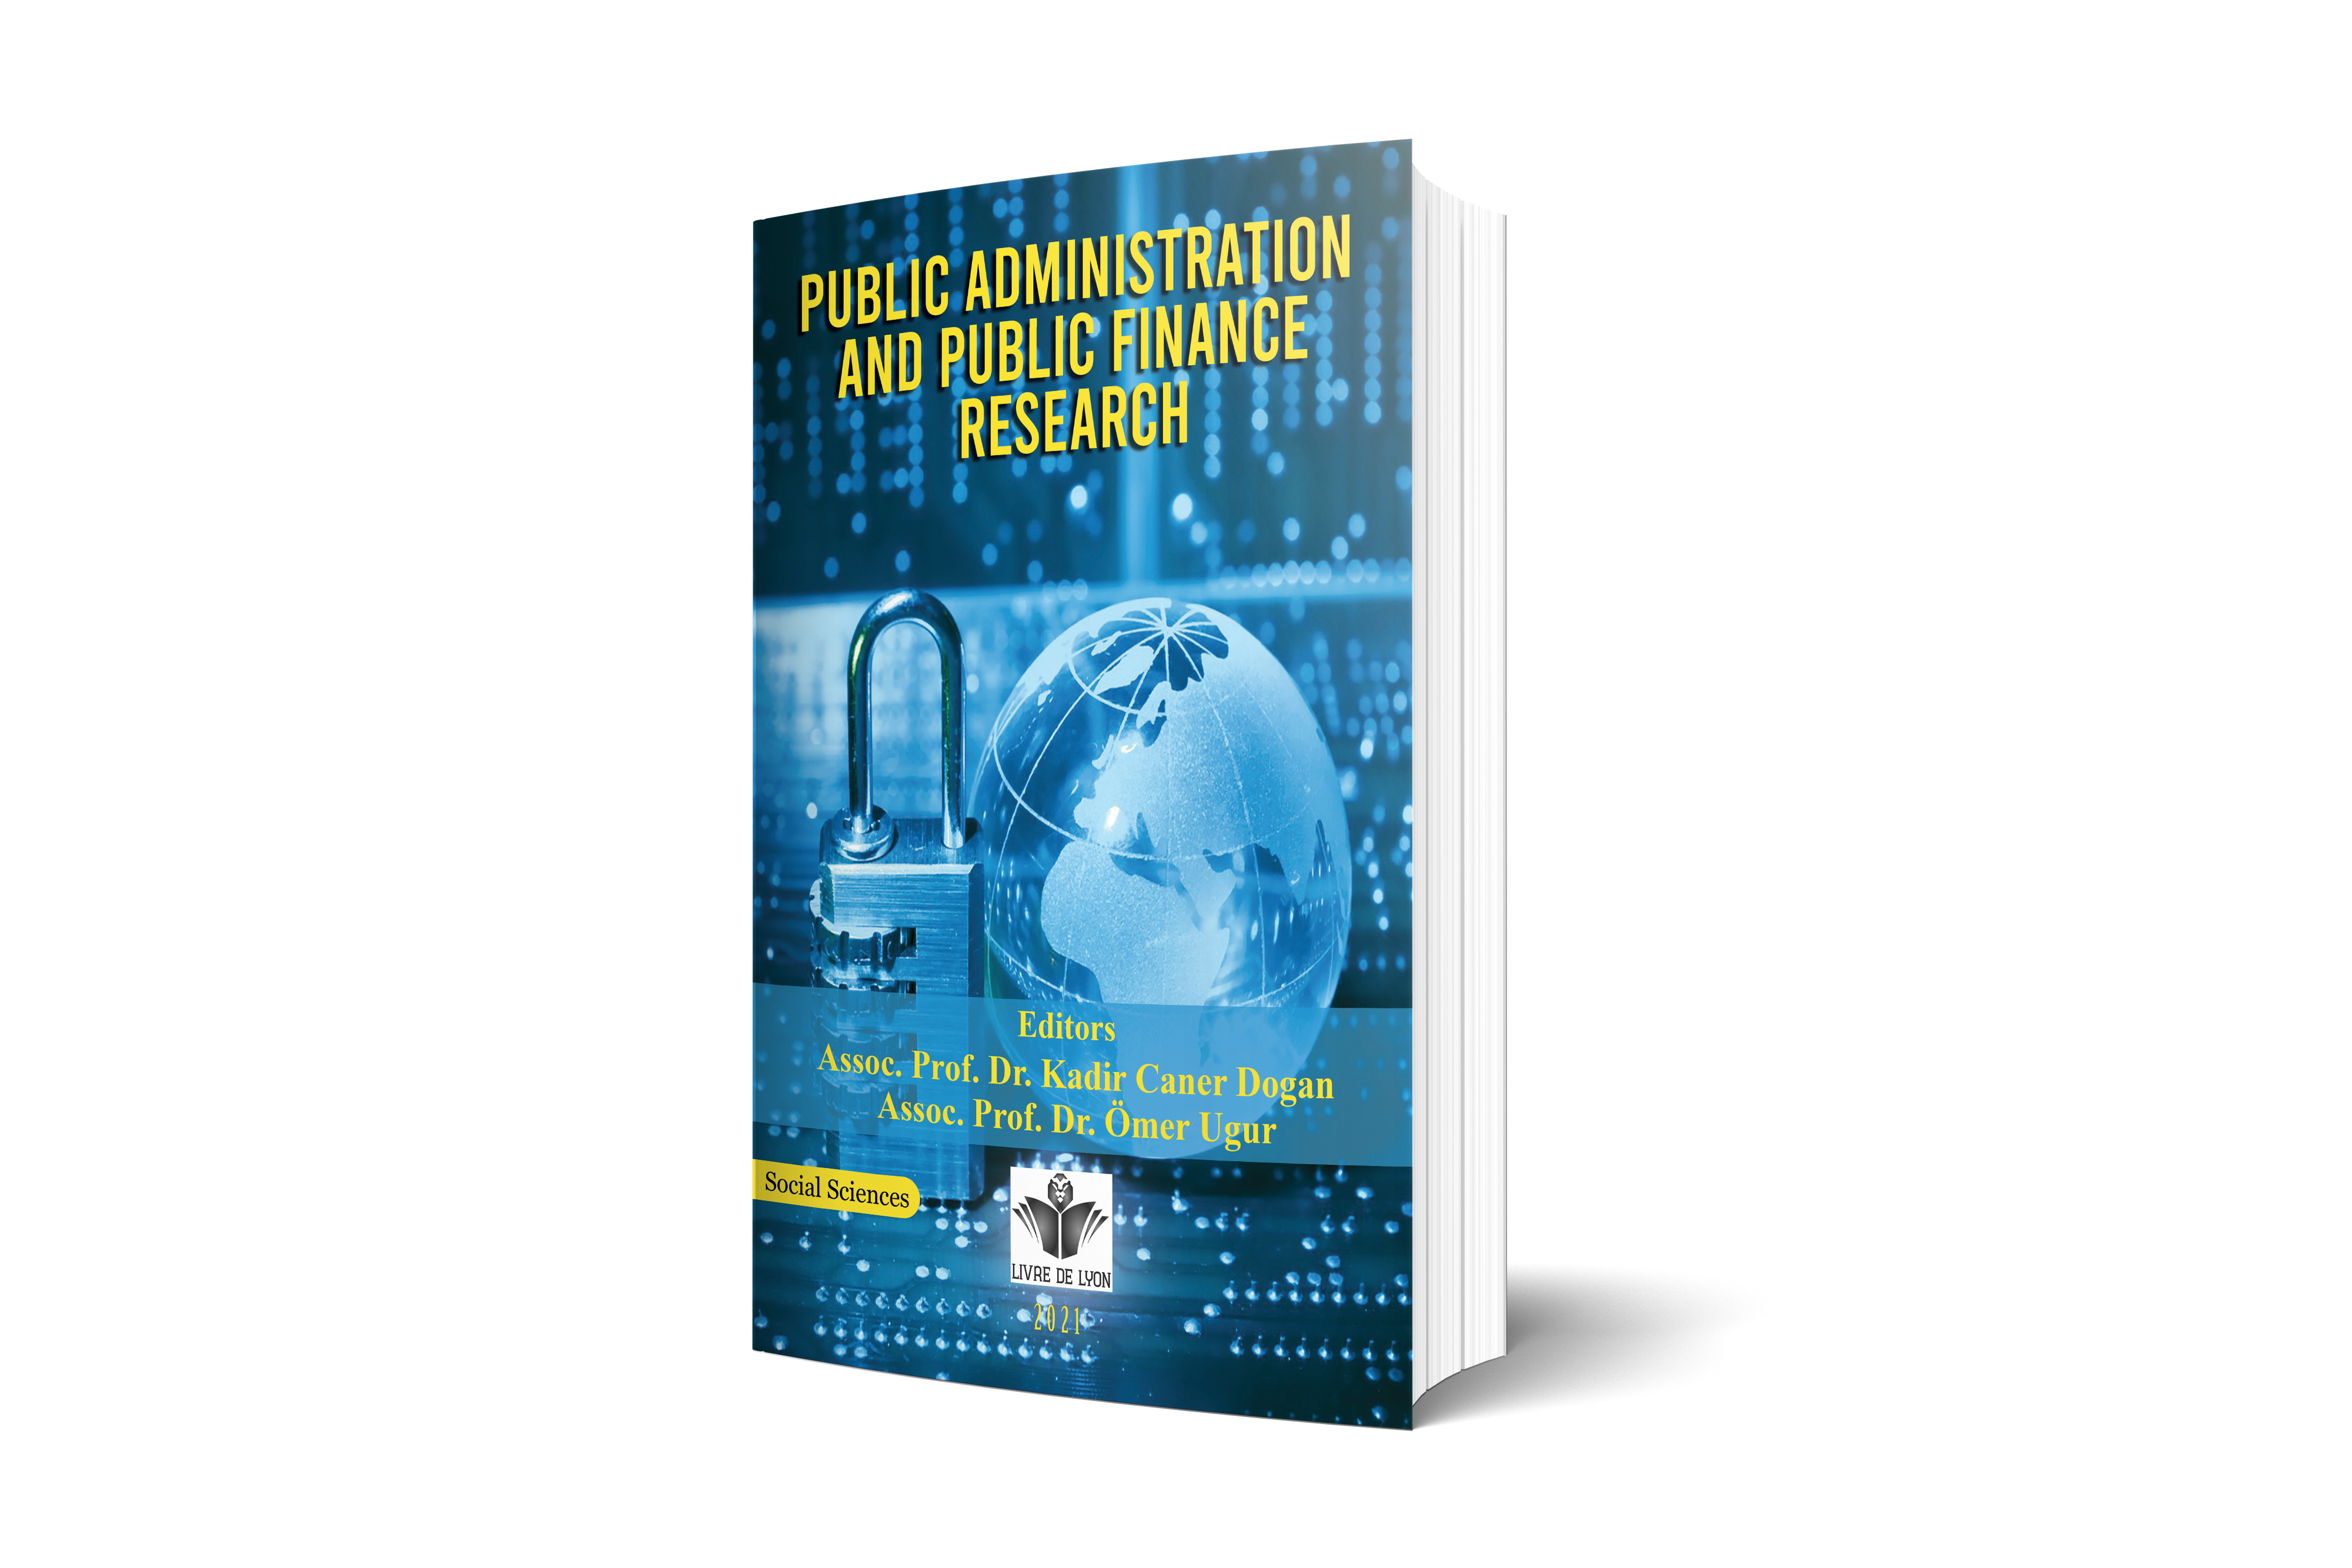 Public Administration and Public Finance Research